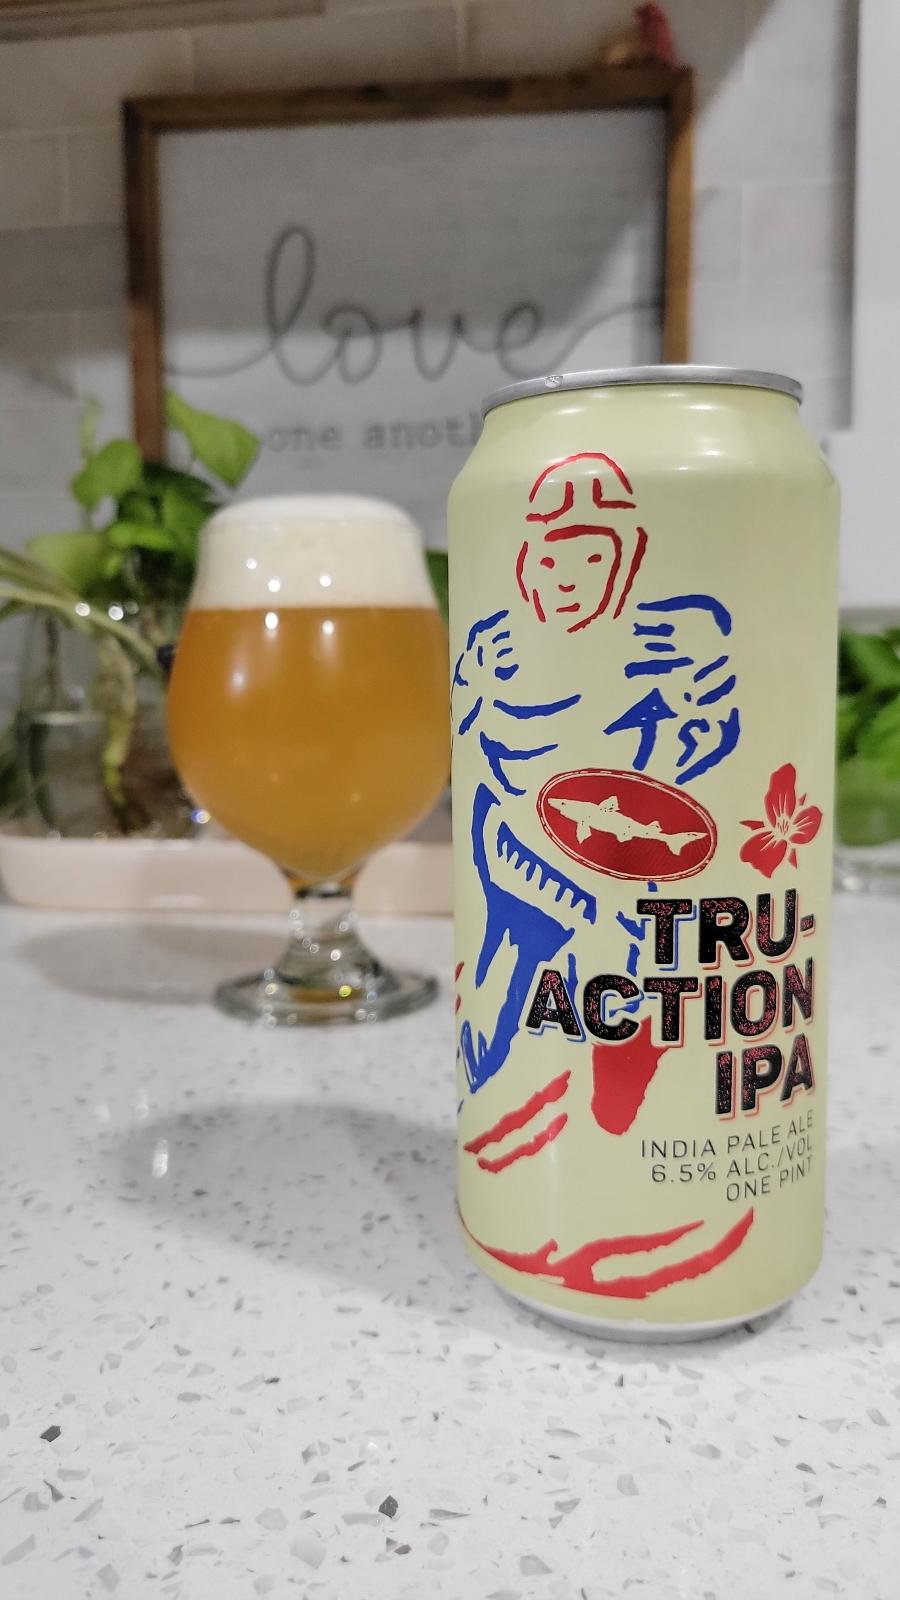 Tru-Action IPA (Collaboration with Trillium Brewing Company)